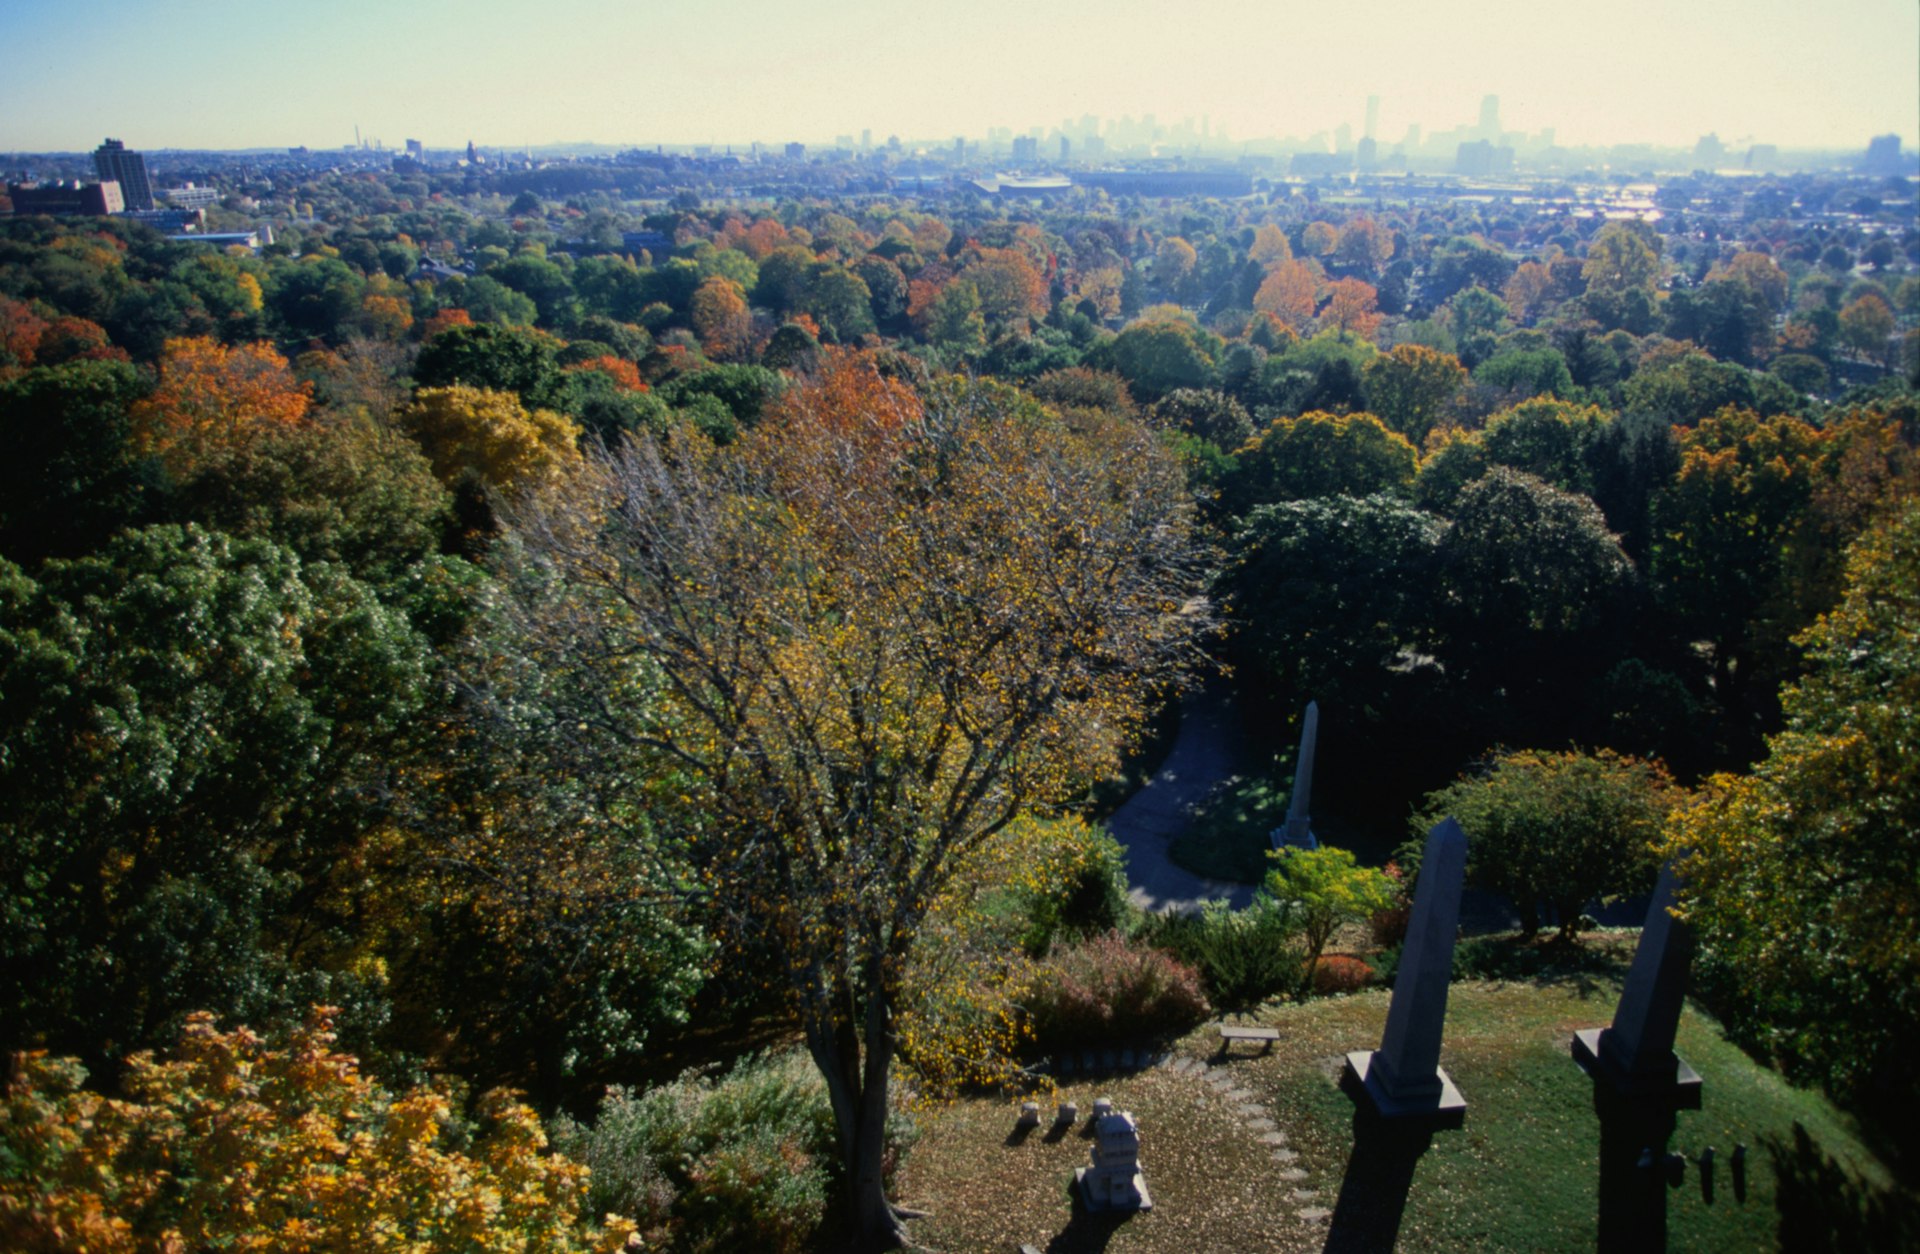 Looking over Mount Auburn Cemetery with a view of  Charles River Valley from the tower.